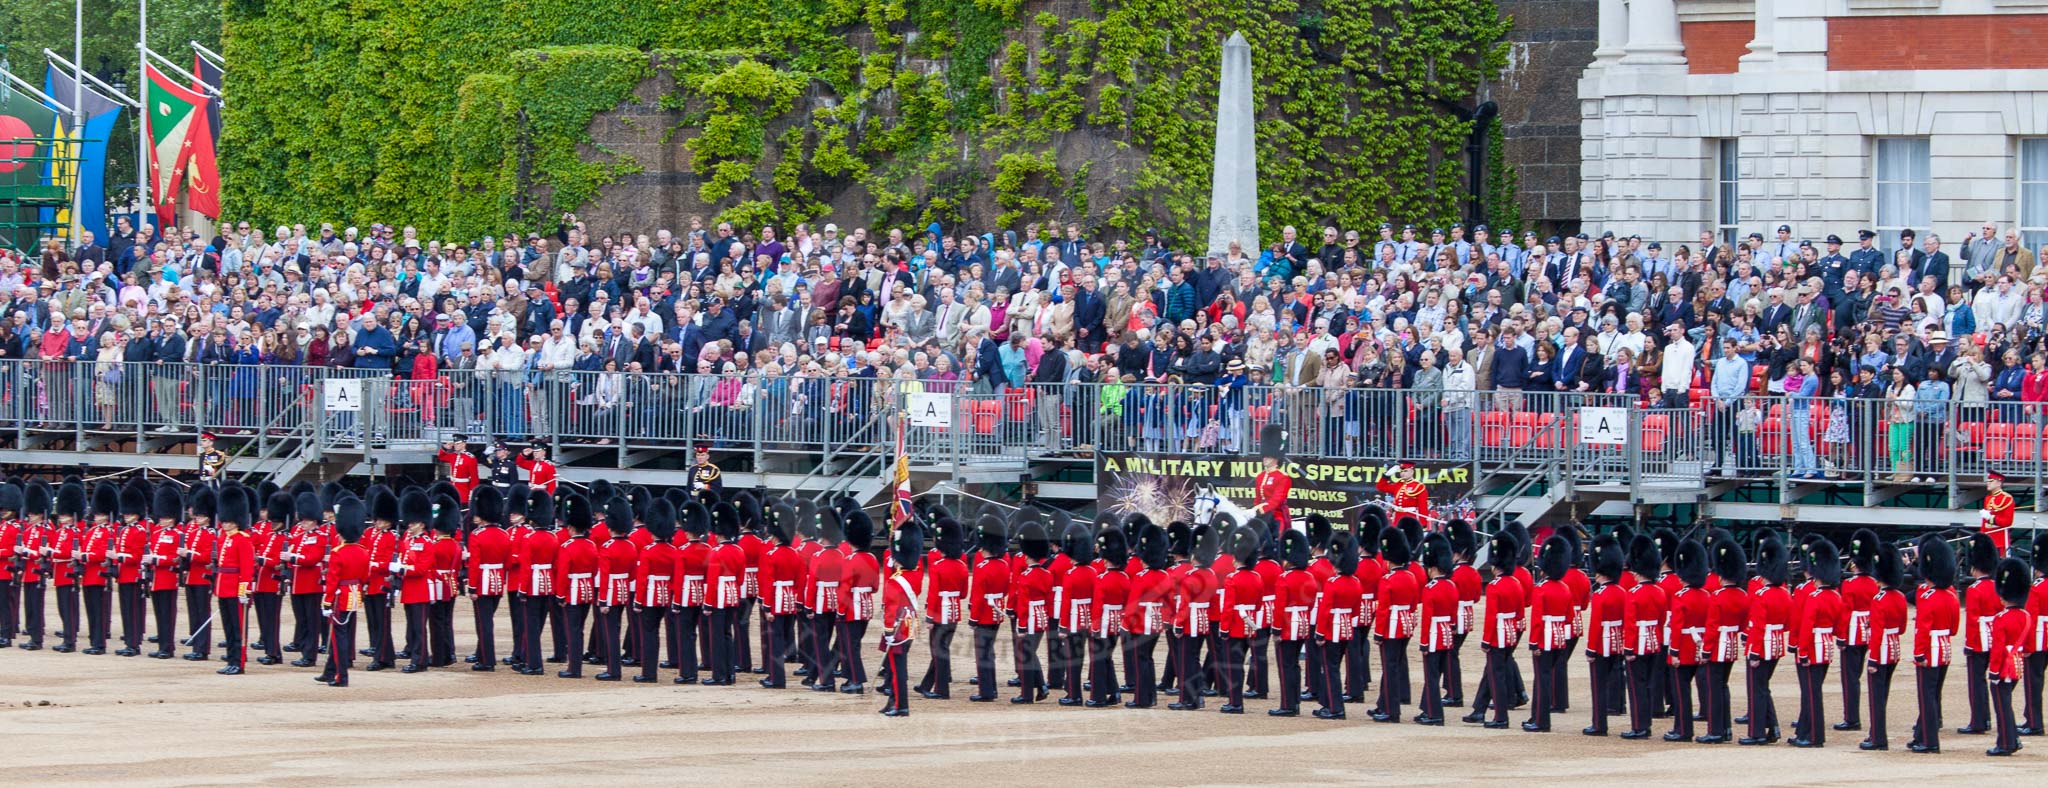 Major General's Review 2013: The Escort Tto the Colour is marching towards No.6 Guard..
Horse Guards Parade, Westminster,
London SW1,

United Kingdom,
on 01 June 2013 at 11:23, image #419